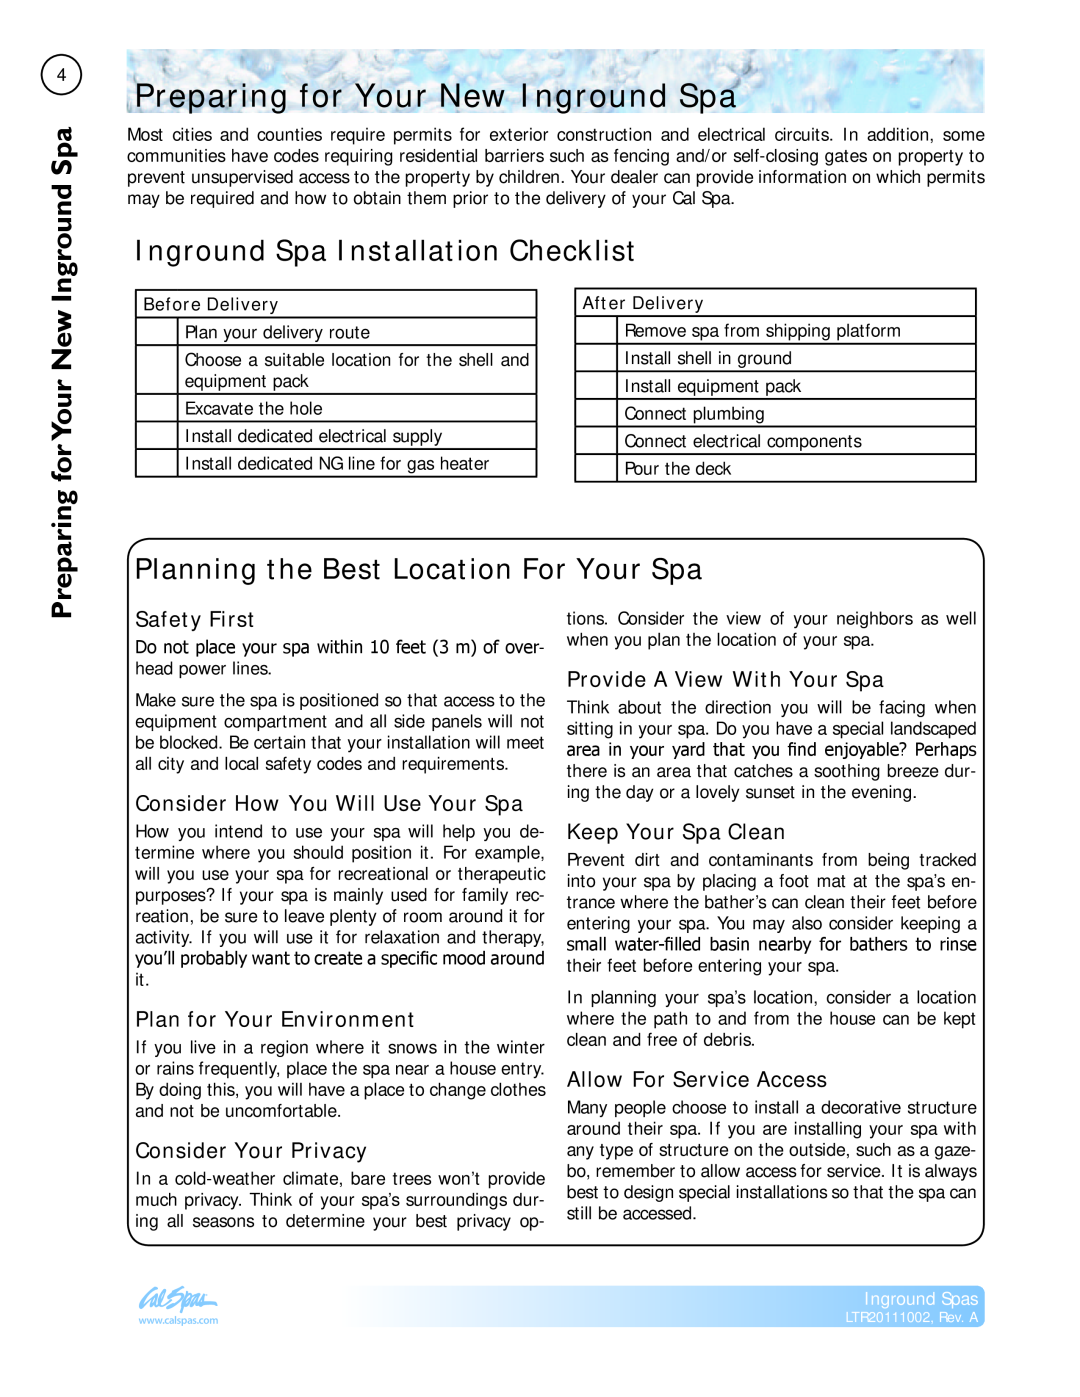 Cal Spas LTR20111002 Preparing for Your New Inground Spa, Inground Spa Installation Checklist, forYour New, Safety First 